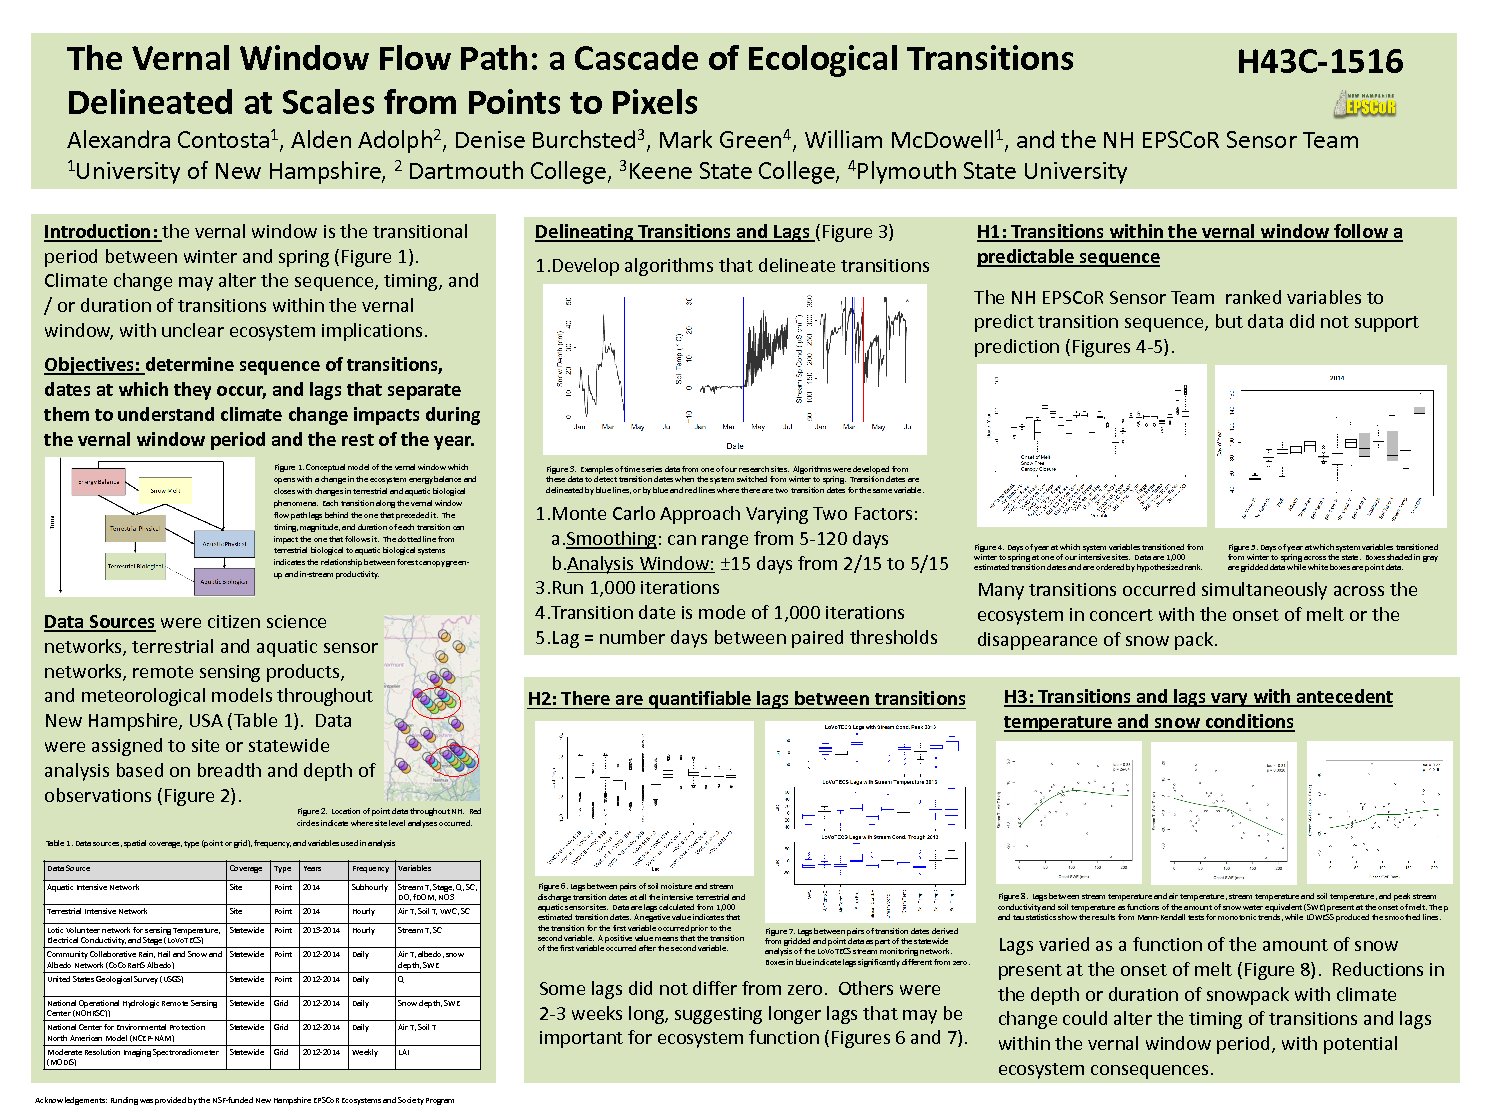 The Vernal Window Flow Path: A Cascade Of Ecological Transitions  Delineated At Scales From Points To Pixels by Contosta